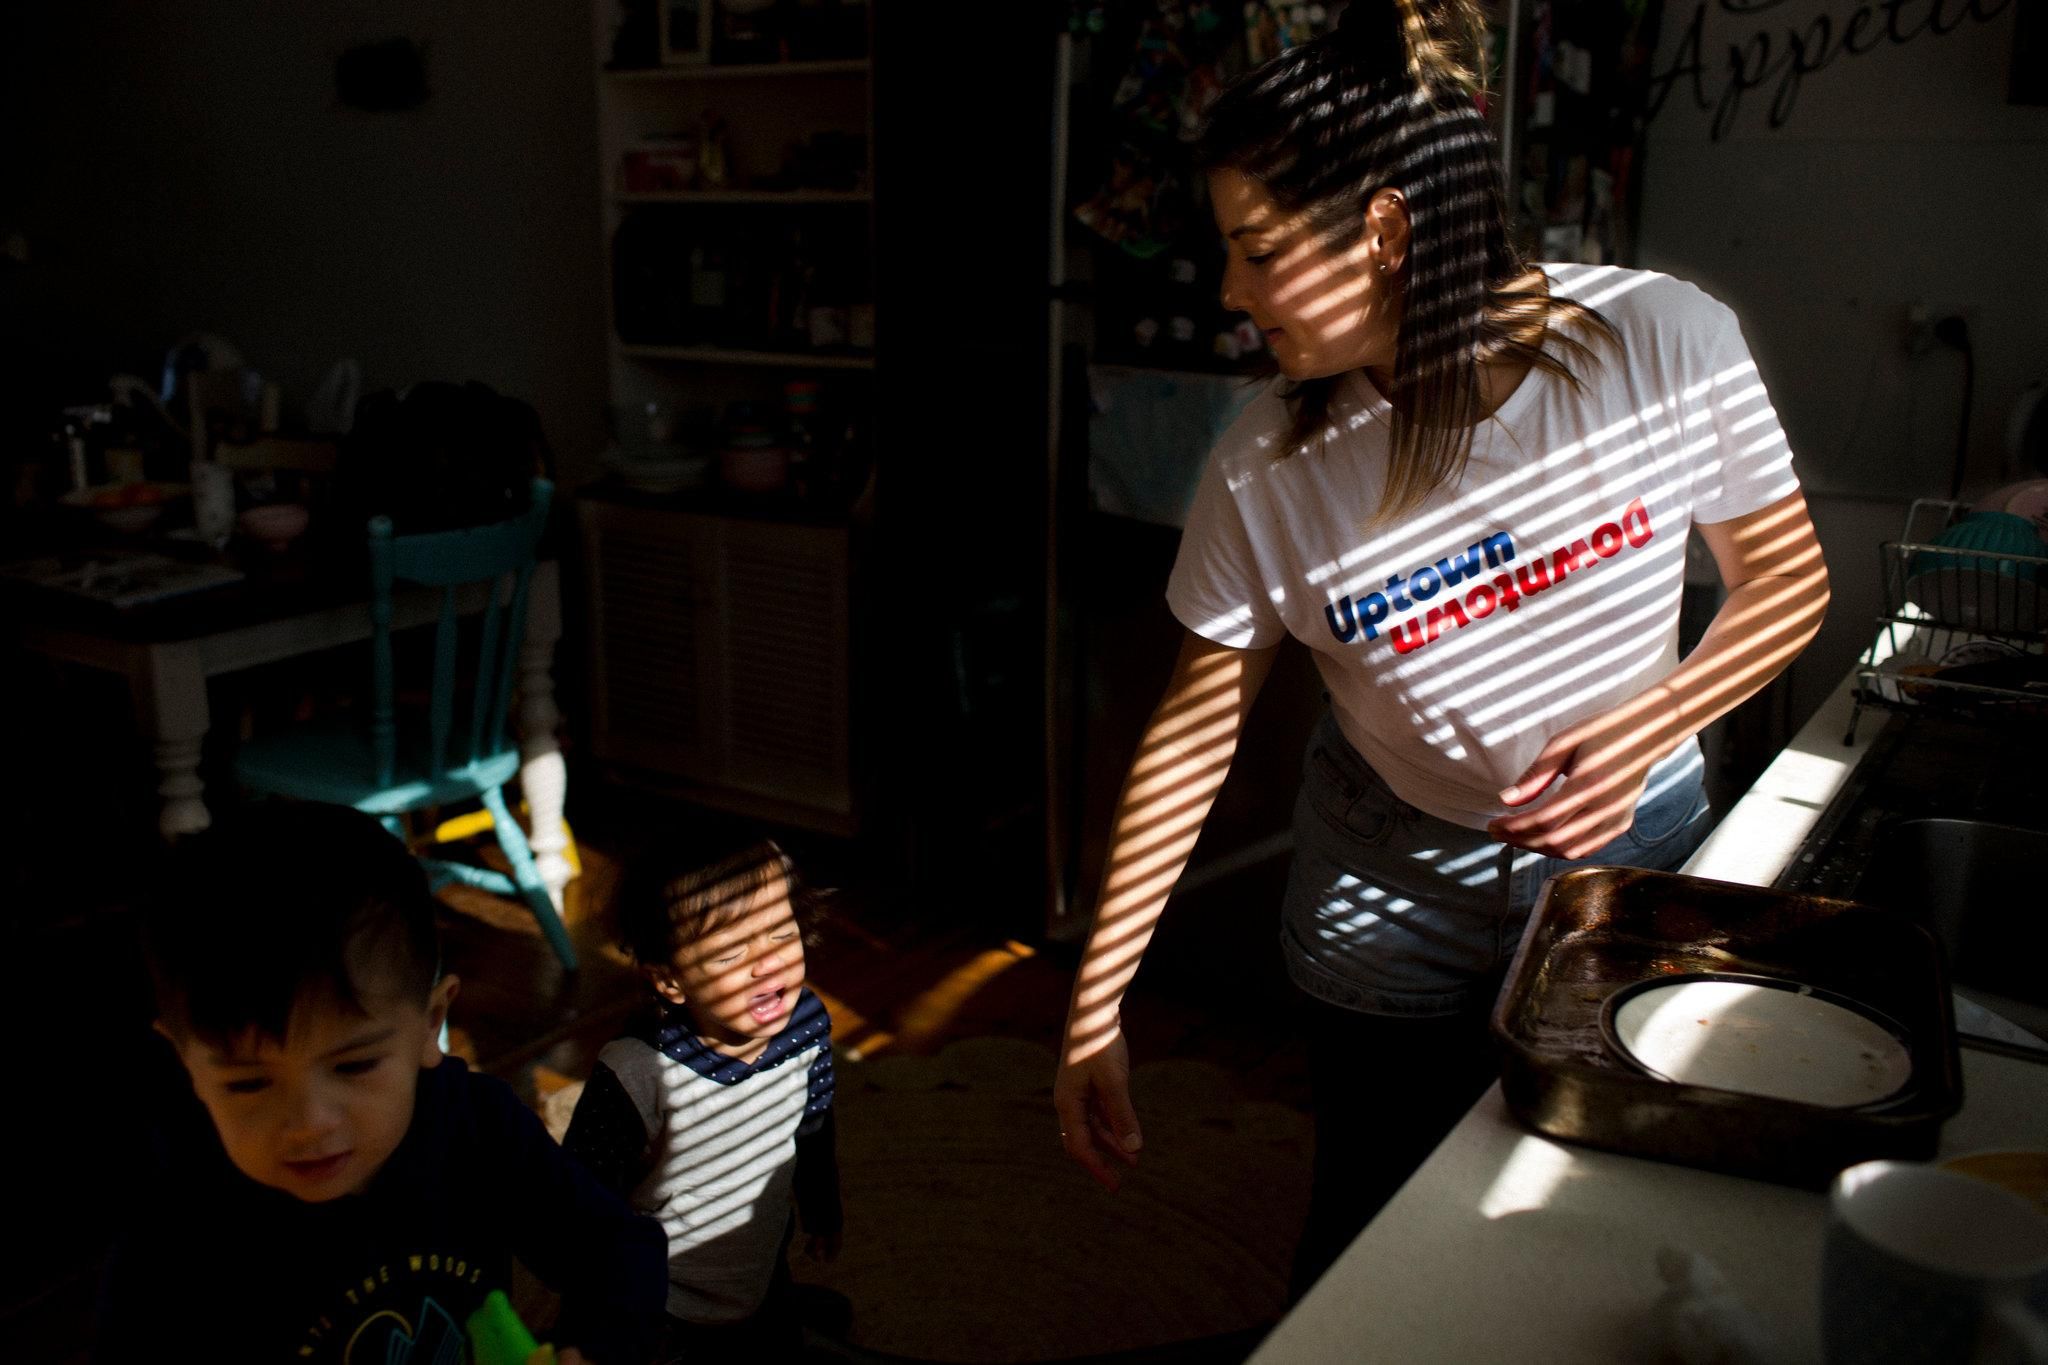 Renay Heng, Mr. Stowers’s partner, preparing to take their sons Isaiah, 3, and Zion, 1, to visit him in the detention center. Image by David Maurice Smith for The New York Times. Australia, 2018.